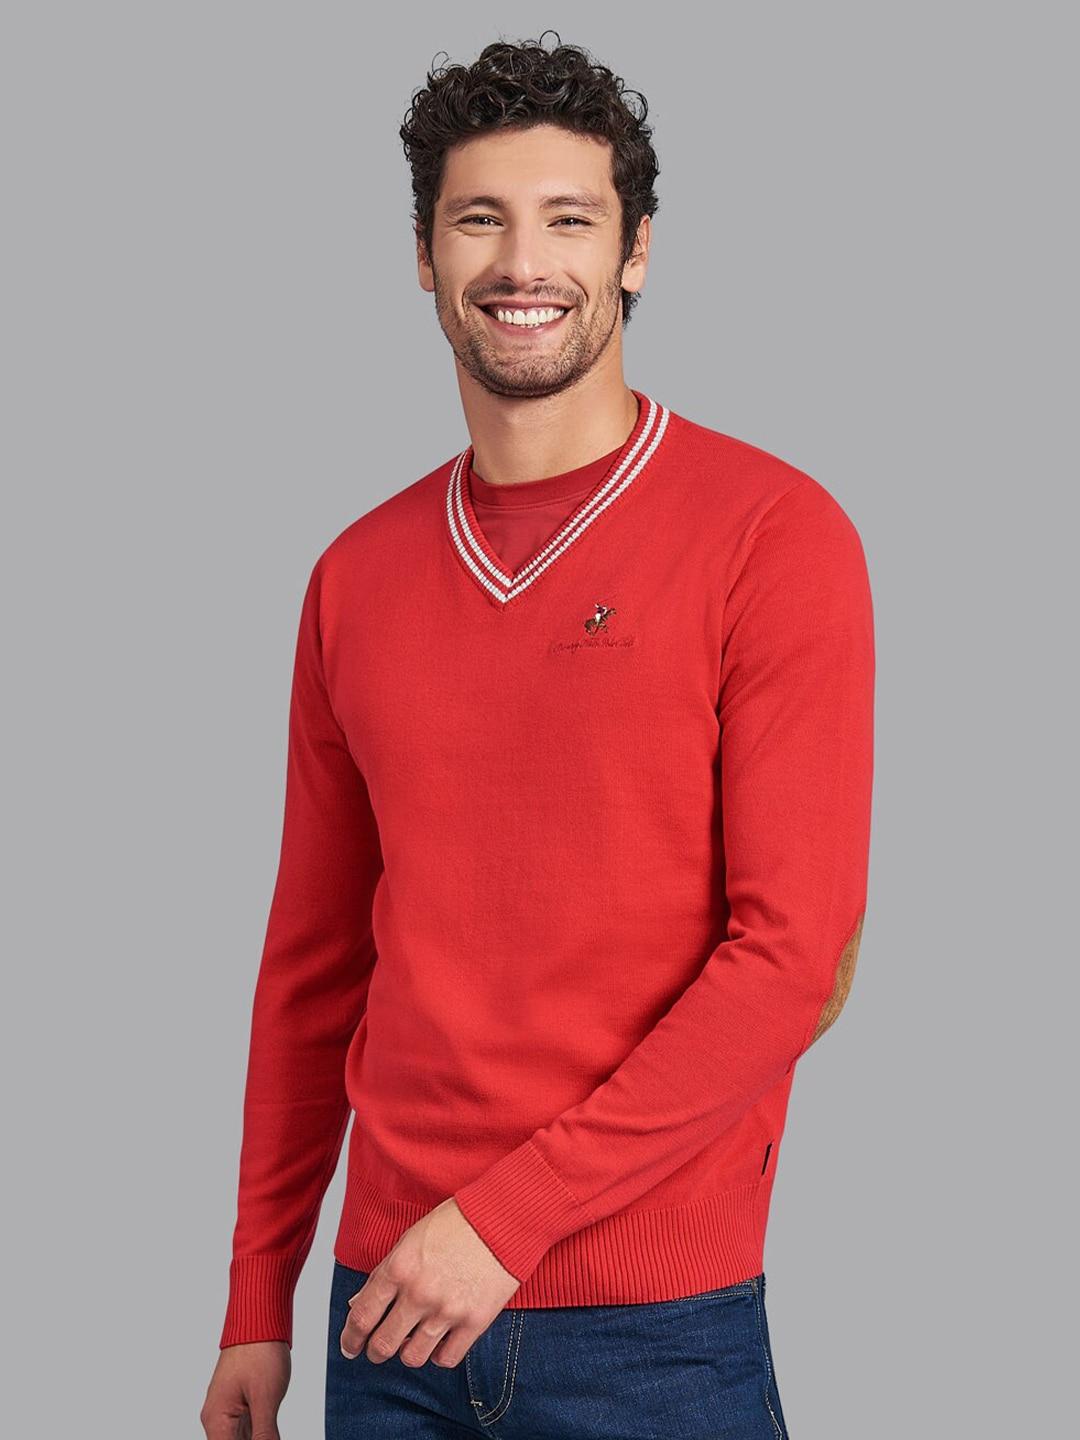 beverly-hills-polo-club-men-red-solid-pullover